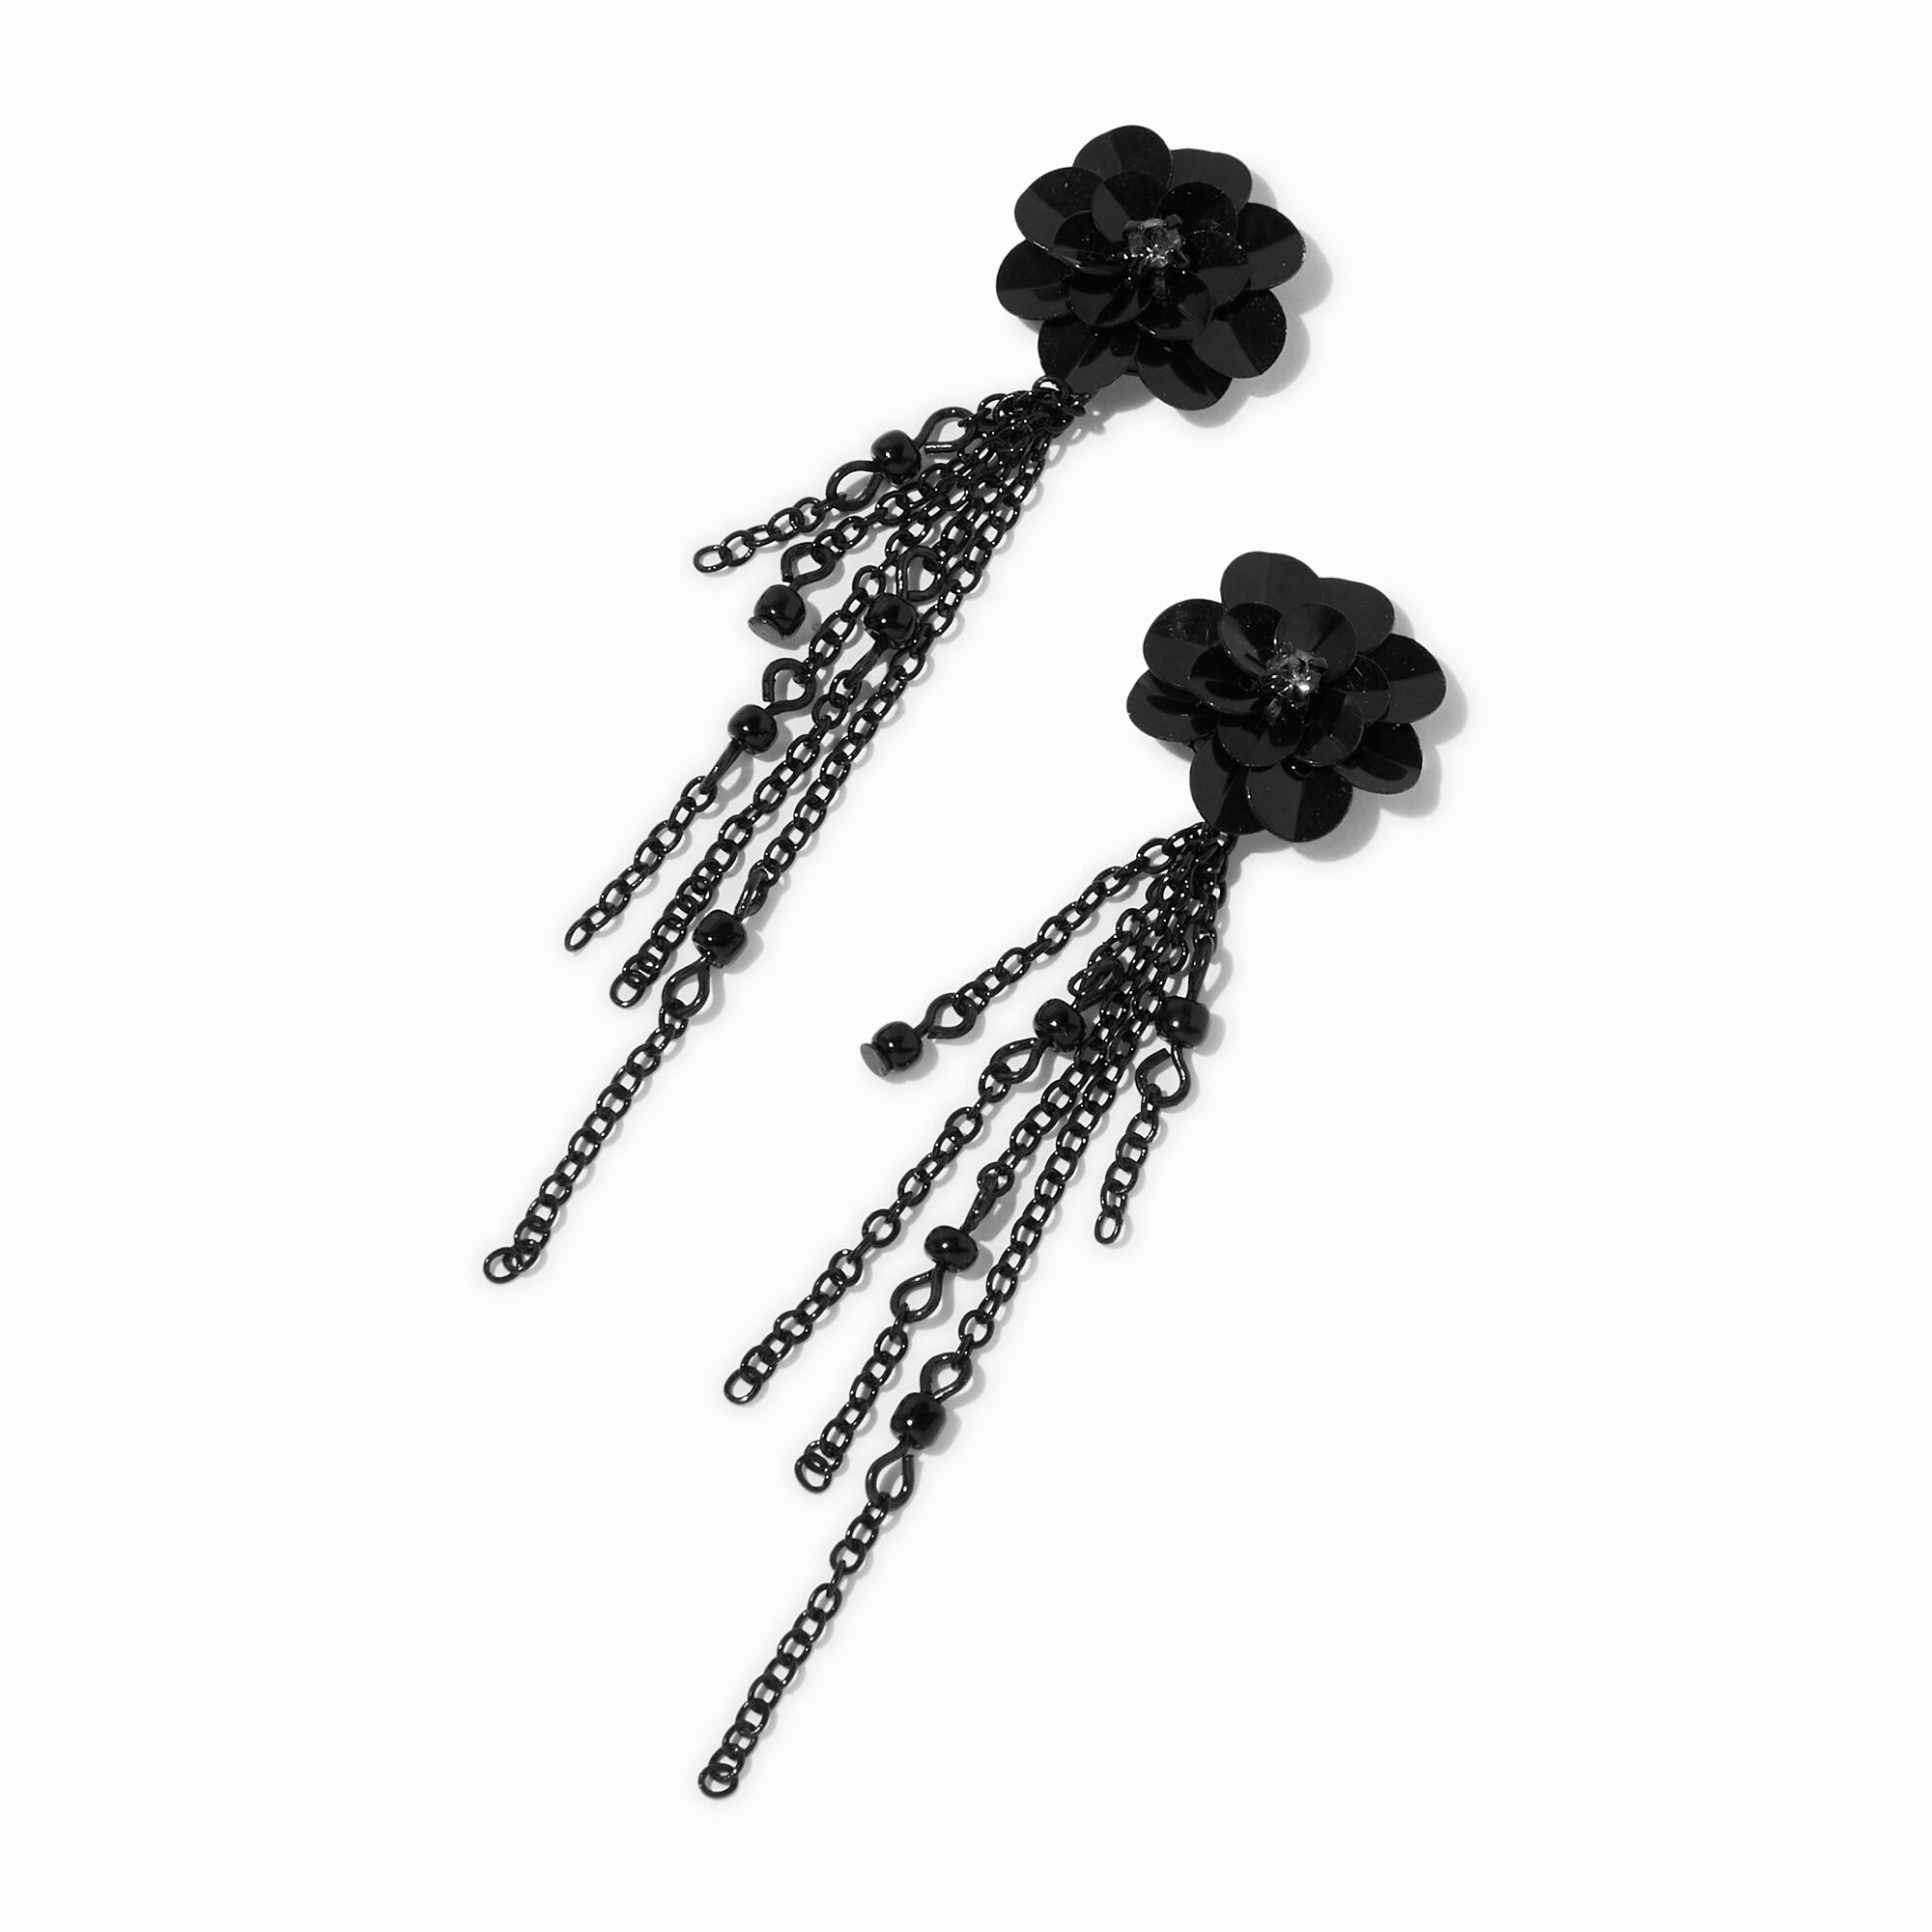 View Claires Floral Linear Chain Fringe 3 Drop Earrings Black information